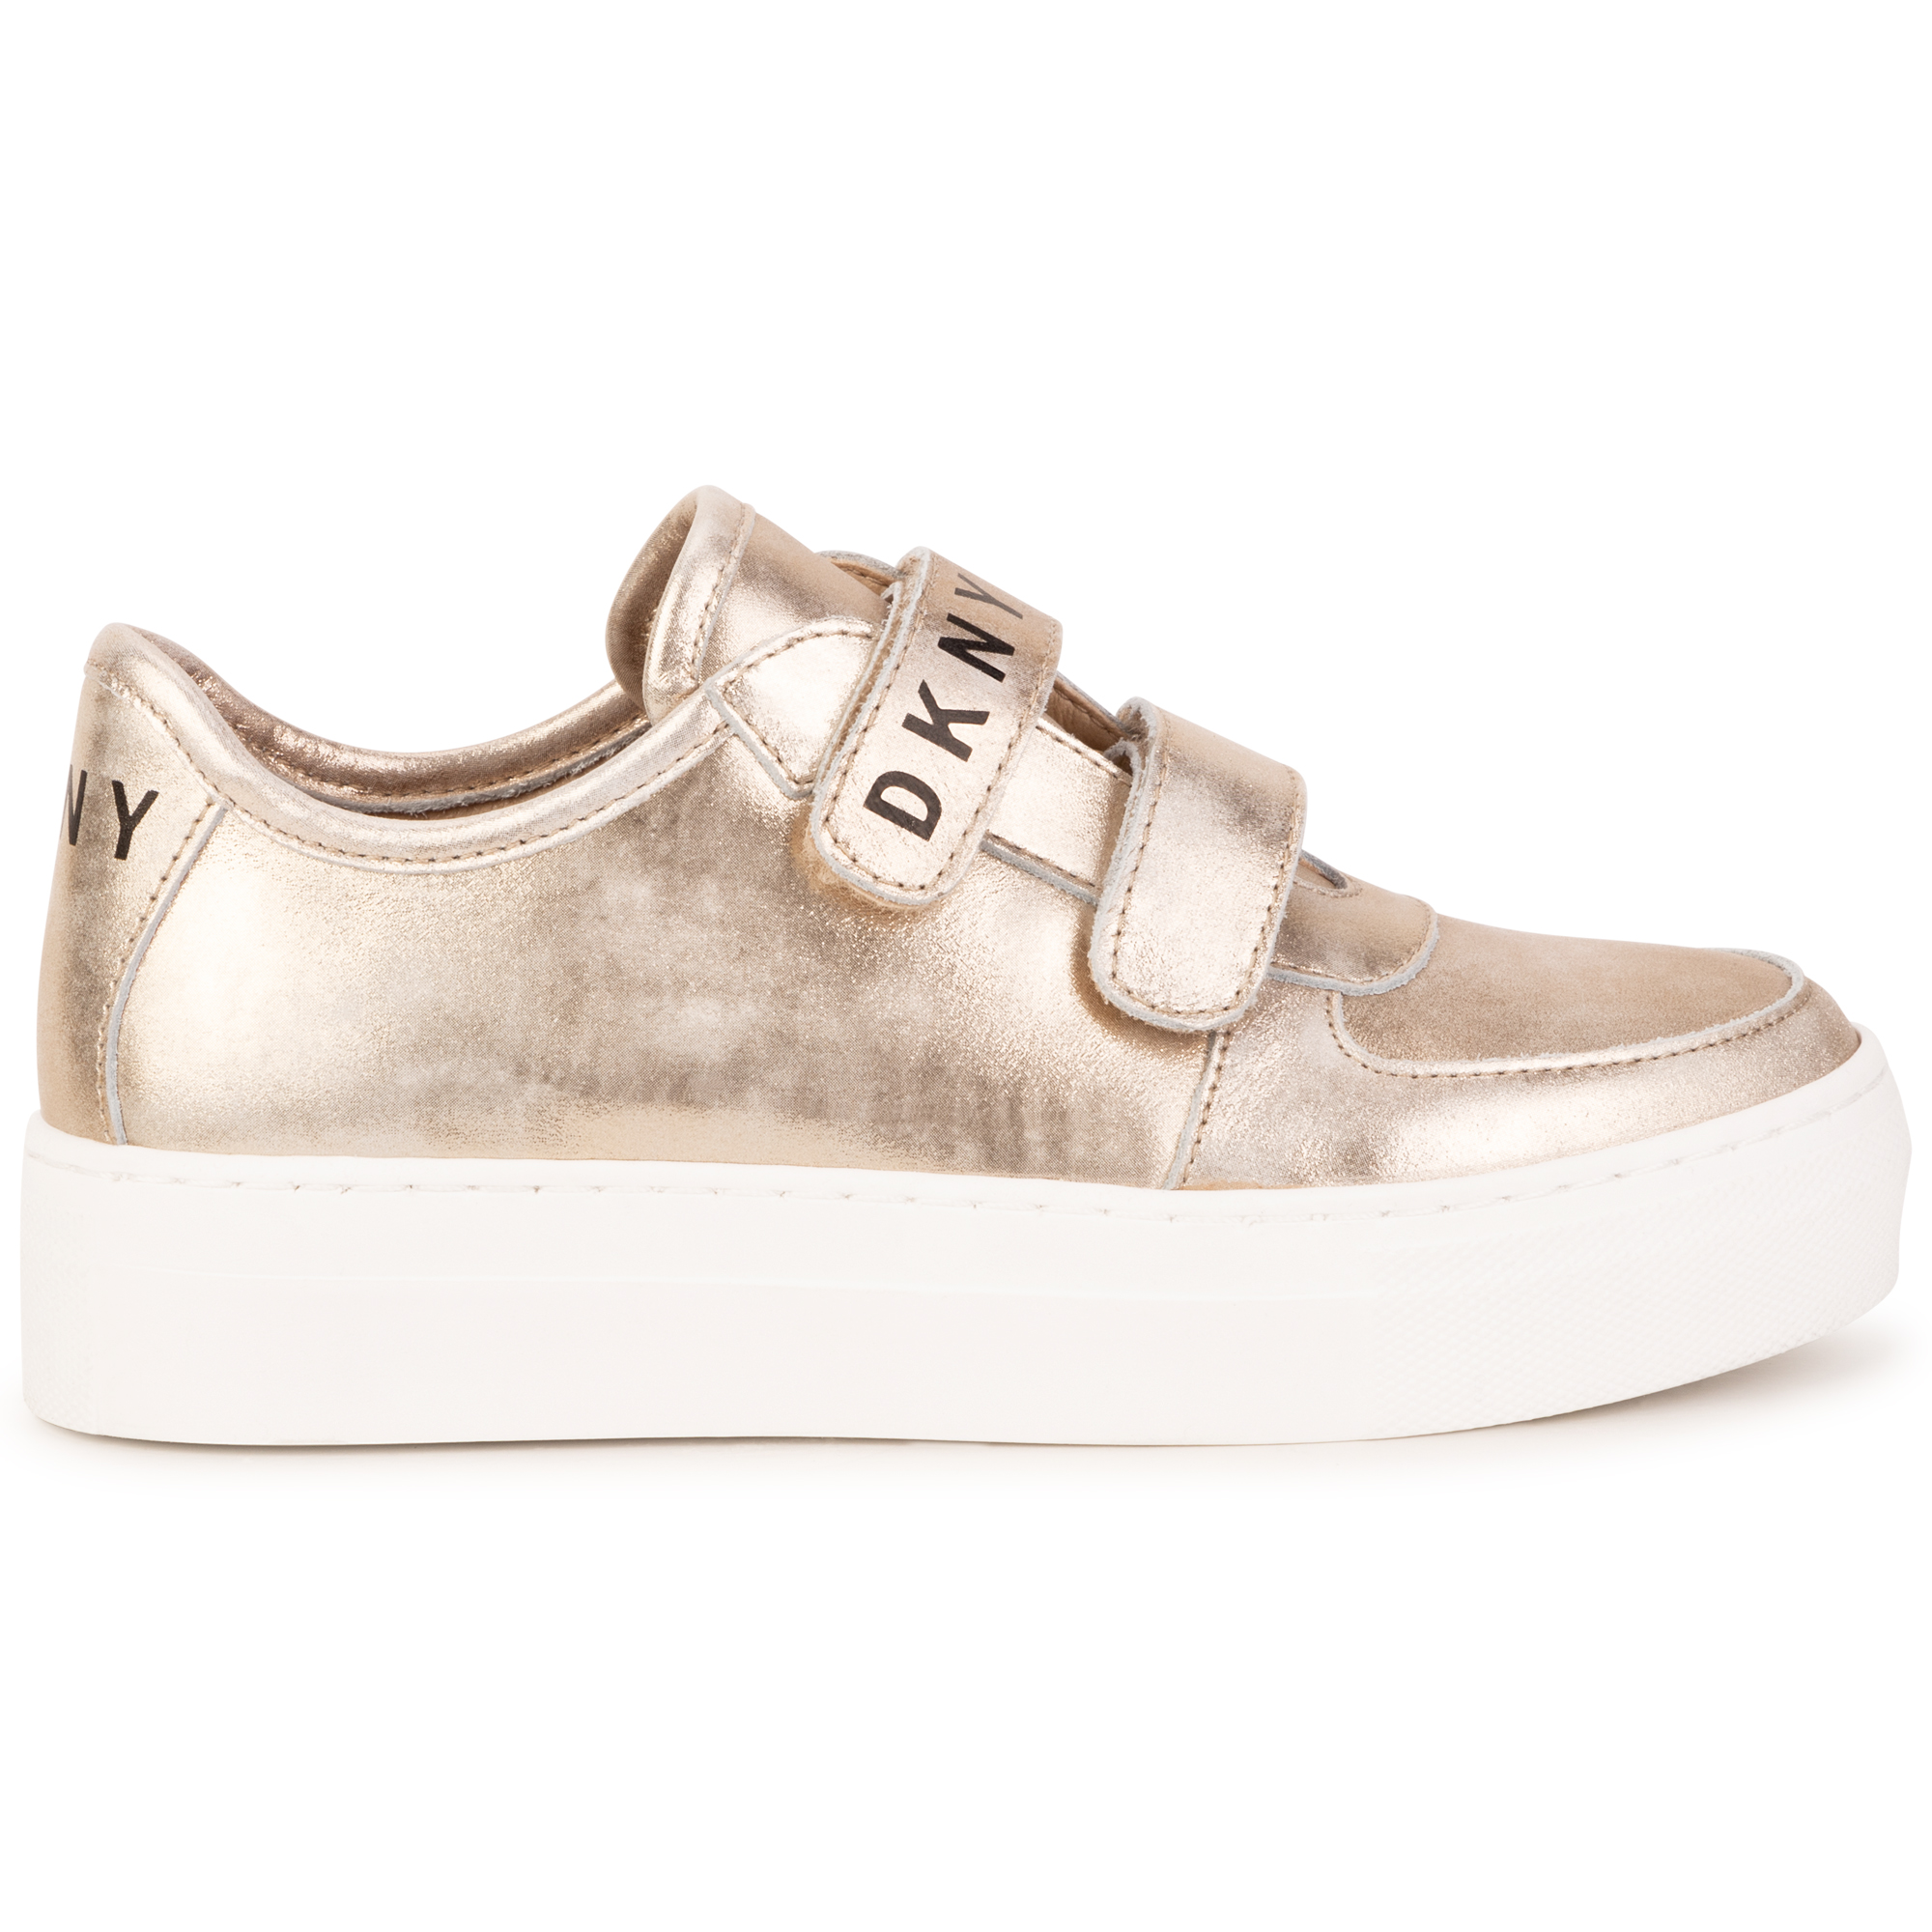 Golden trainers DKNY for GIRL